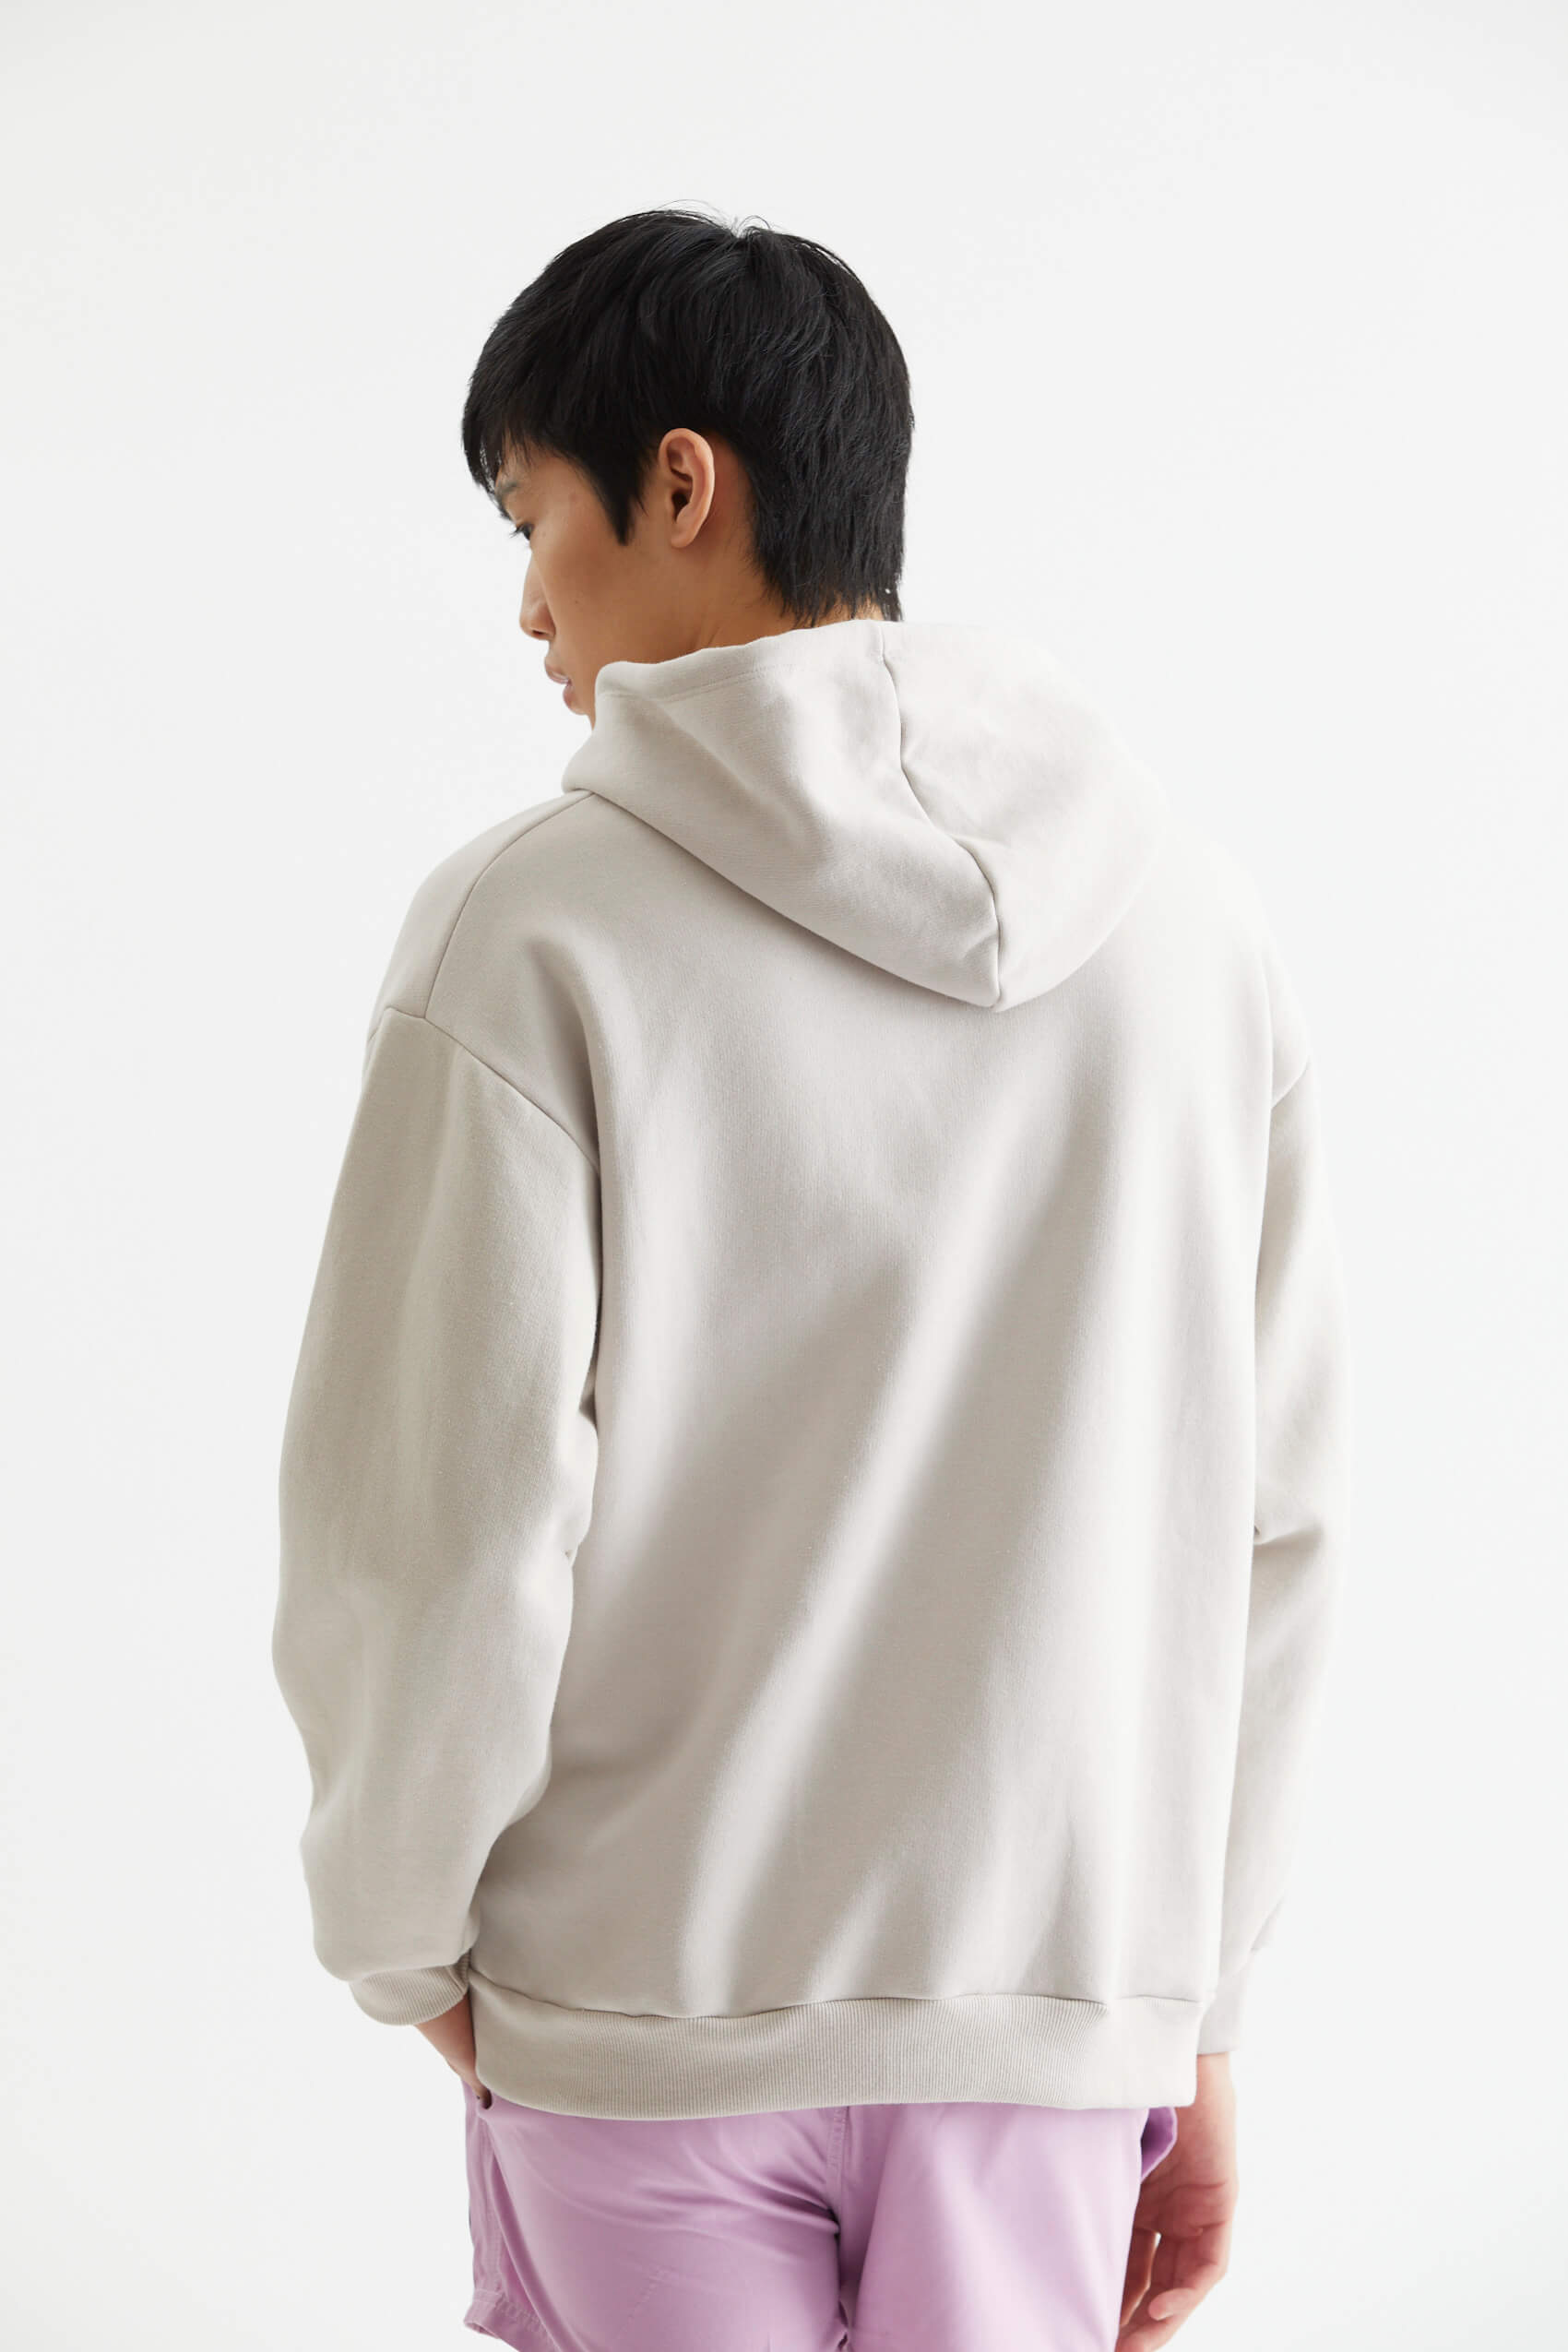 penguin_basic-oversize-hoodie_45-17-2024__picture-41790